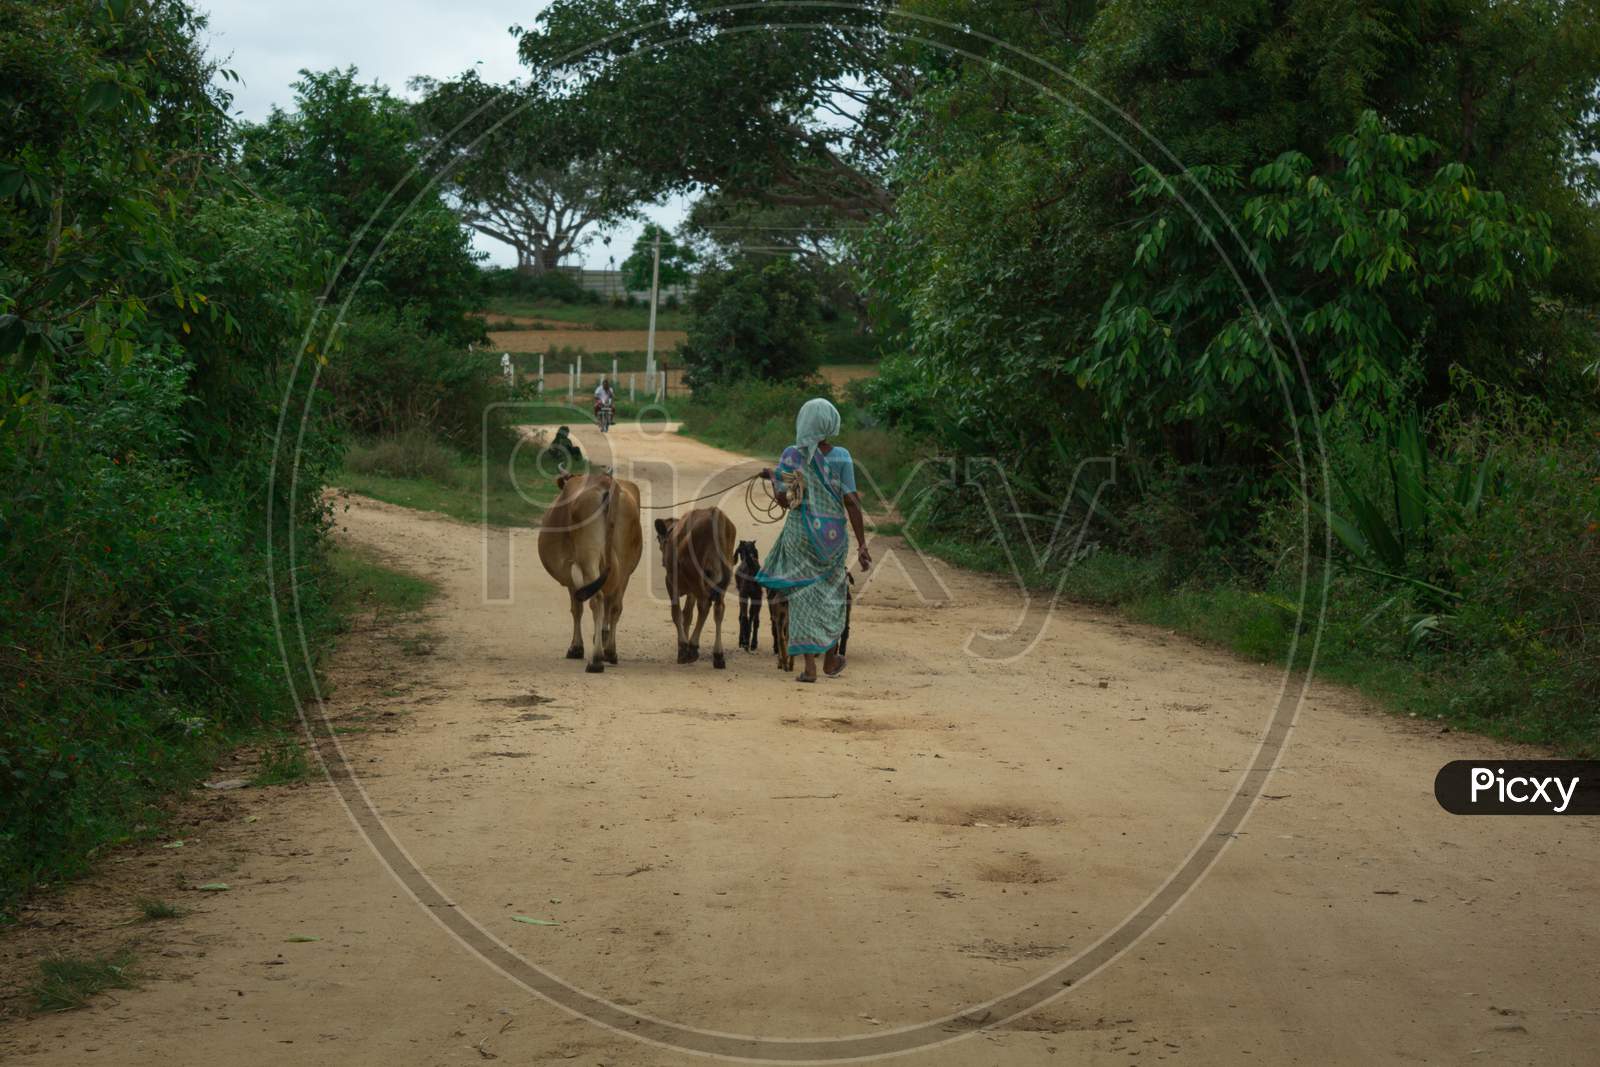 A Pleasing view of a lady farmer seen leading her Cows and Goats towards the Grazing fields in a Village near Mysuru in Karnataka/India.